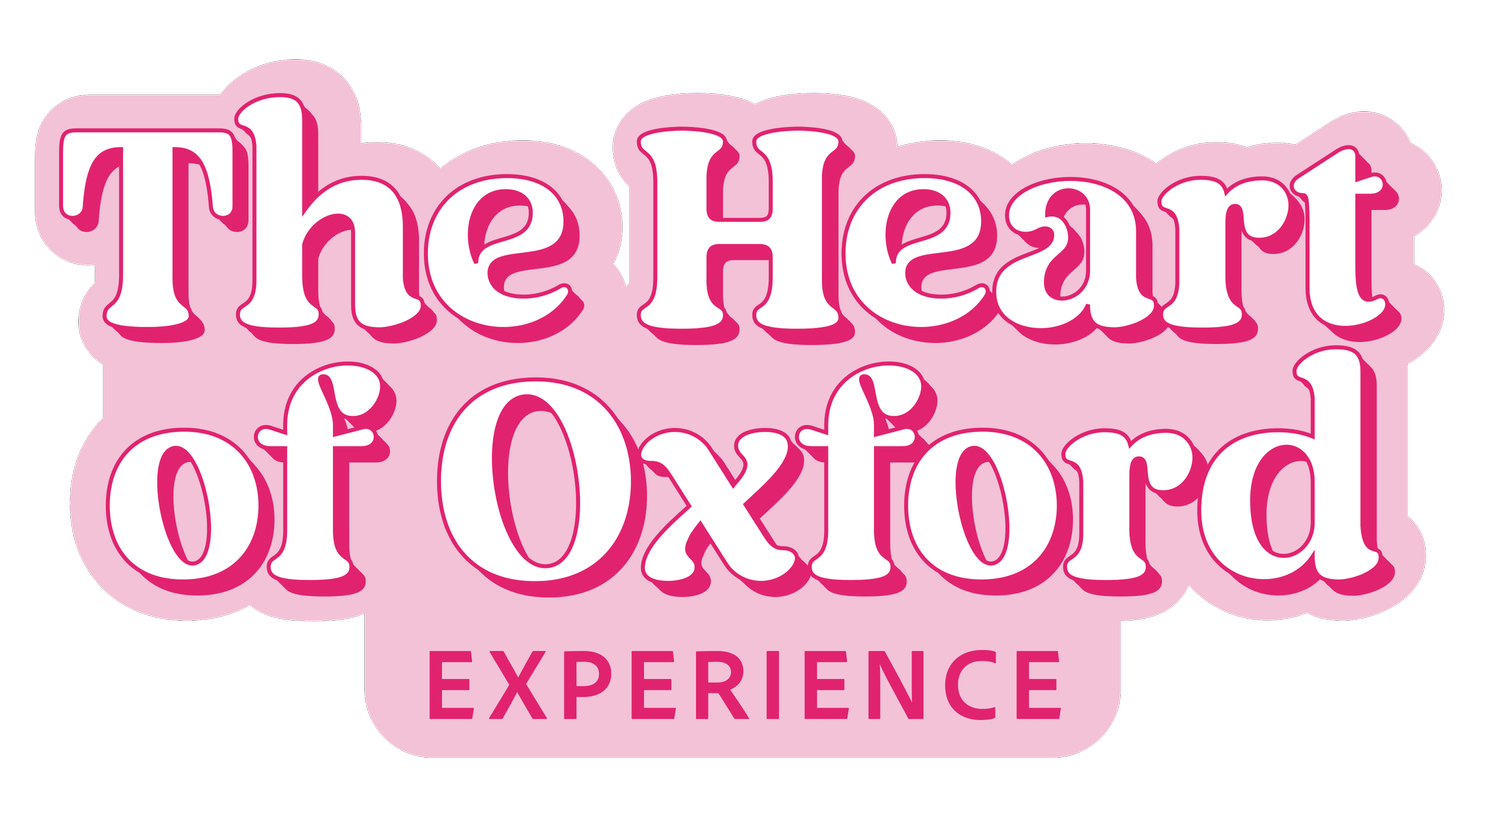 The Heart of Oxford